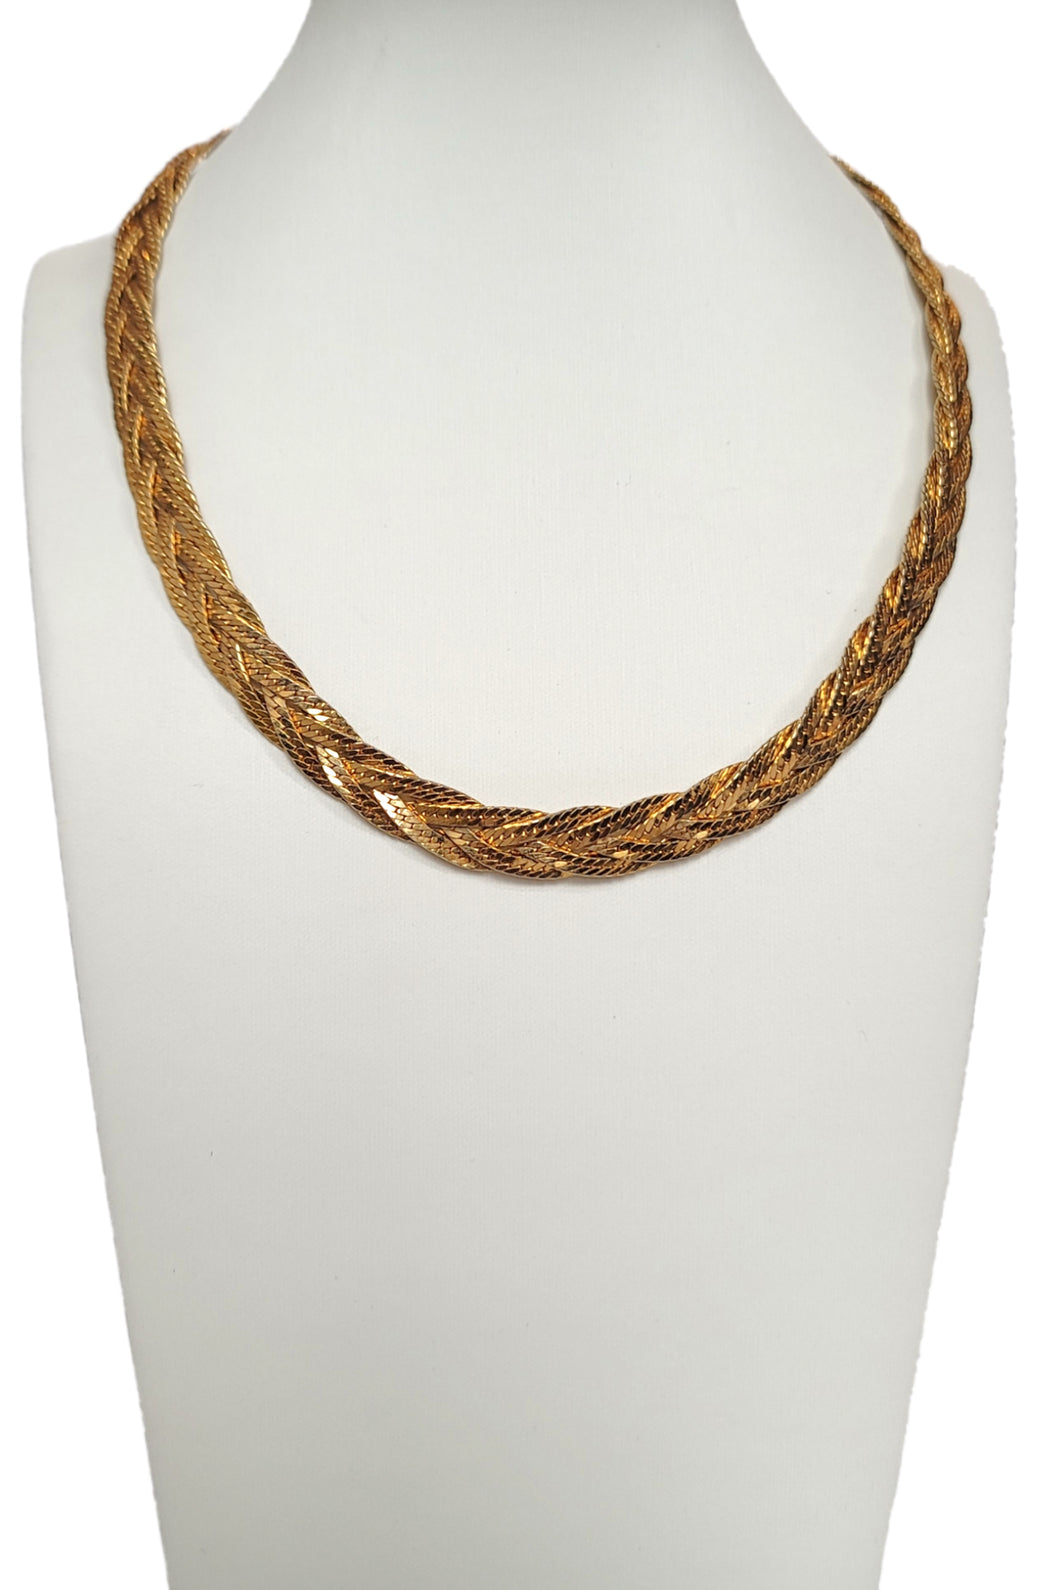 90's Gold Toned Braided Necklace